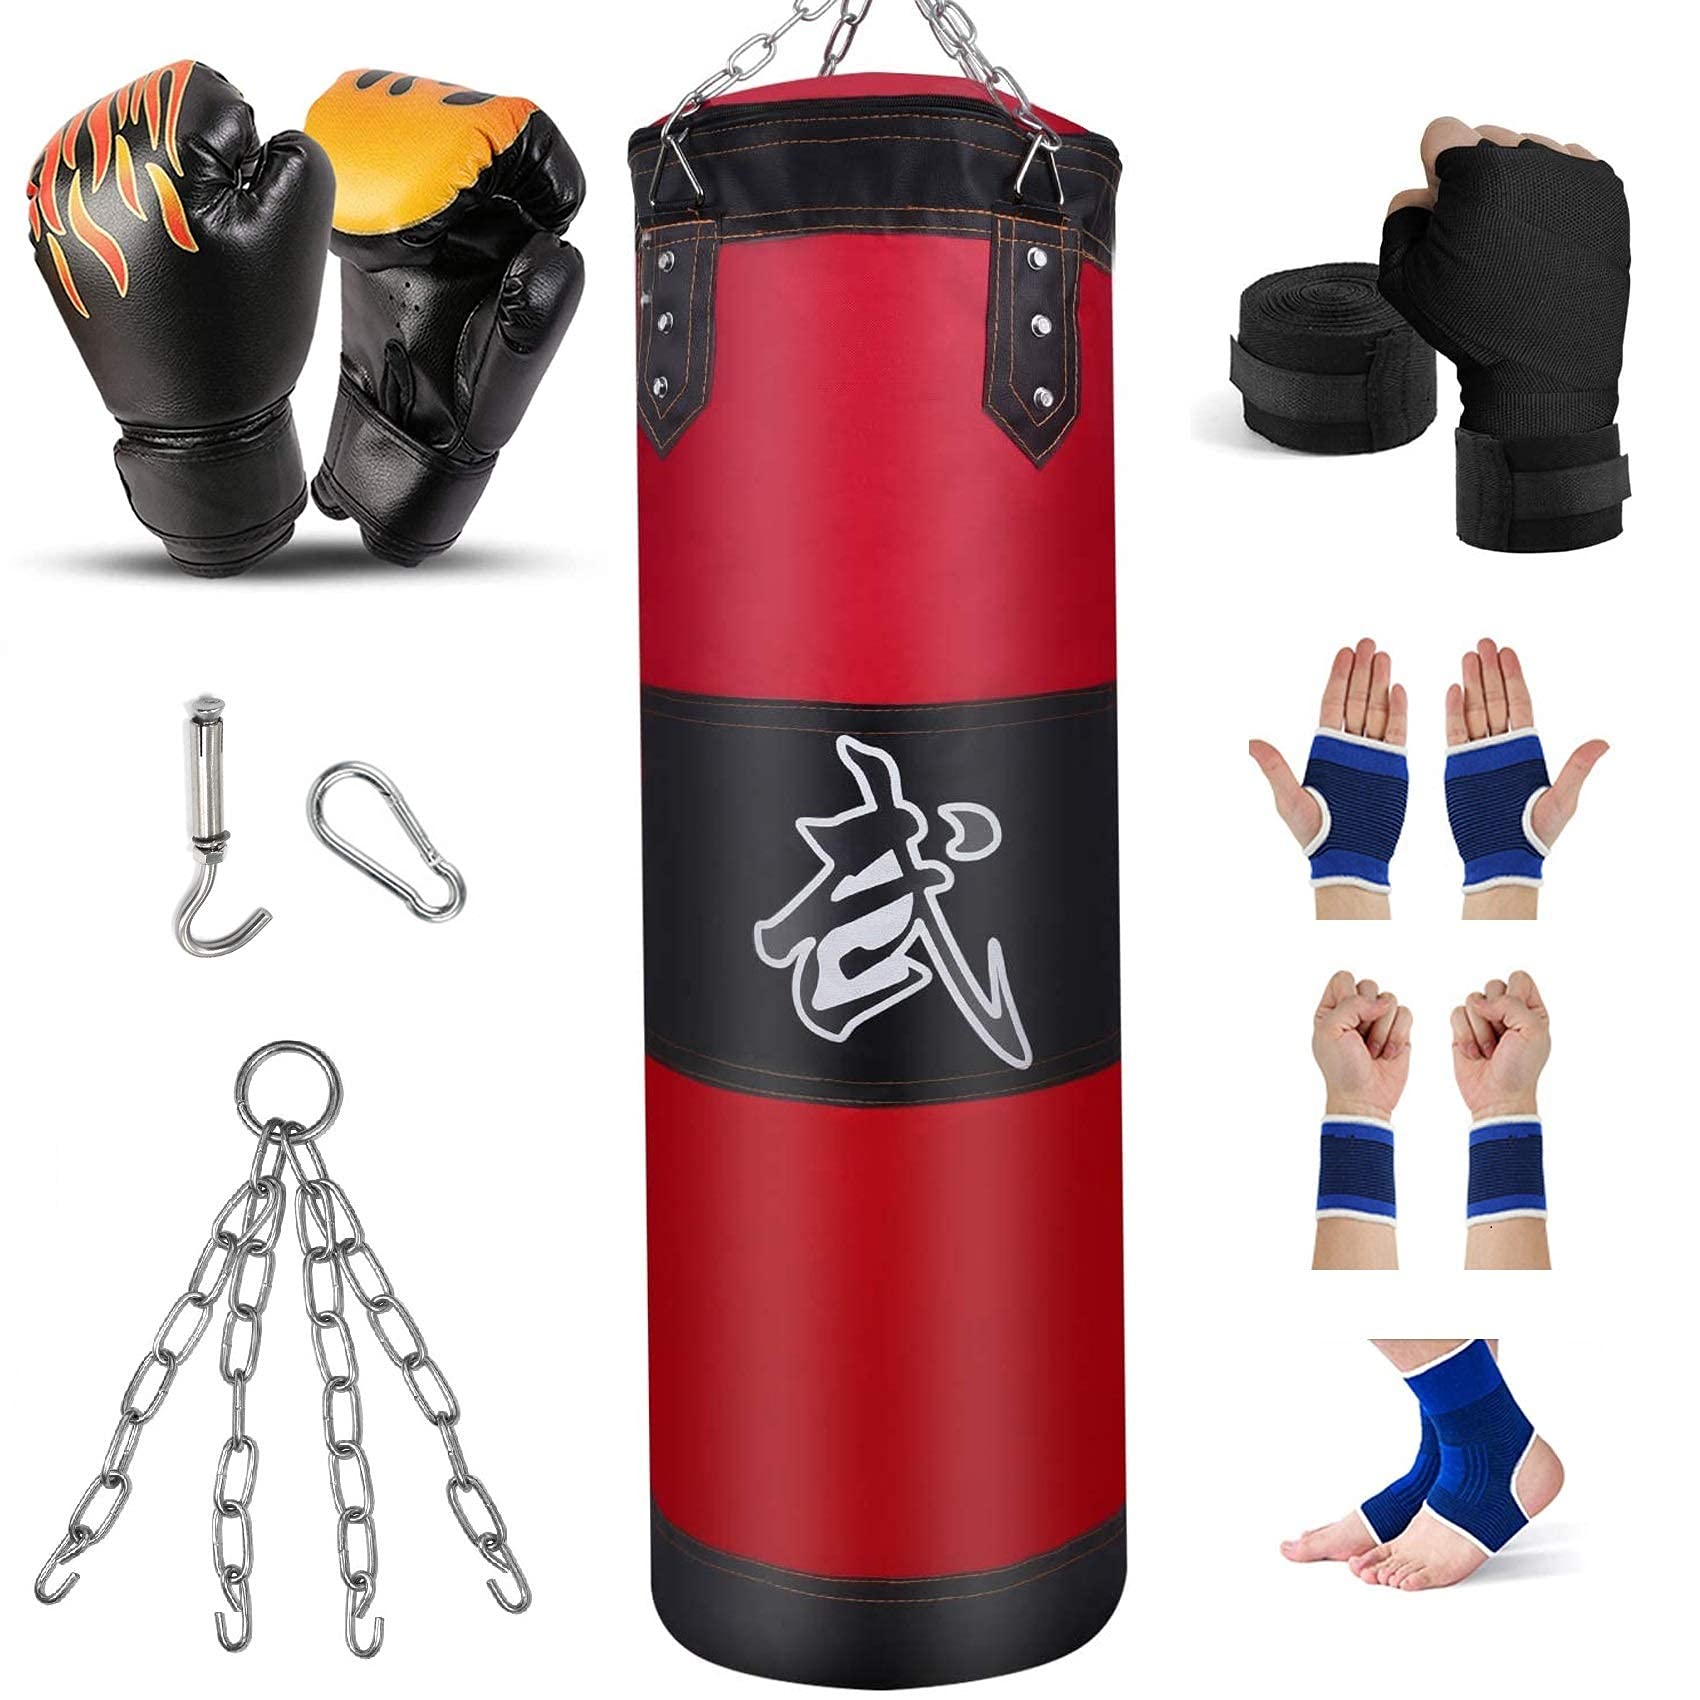 Professional Boxing Gear Made in USA | Nazo Boxing Equipment